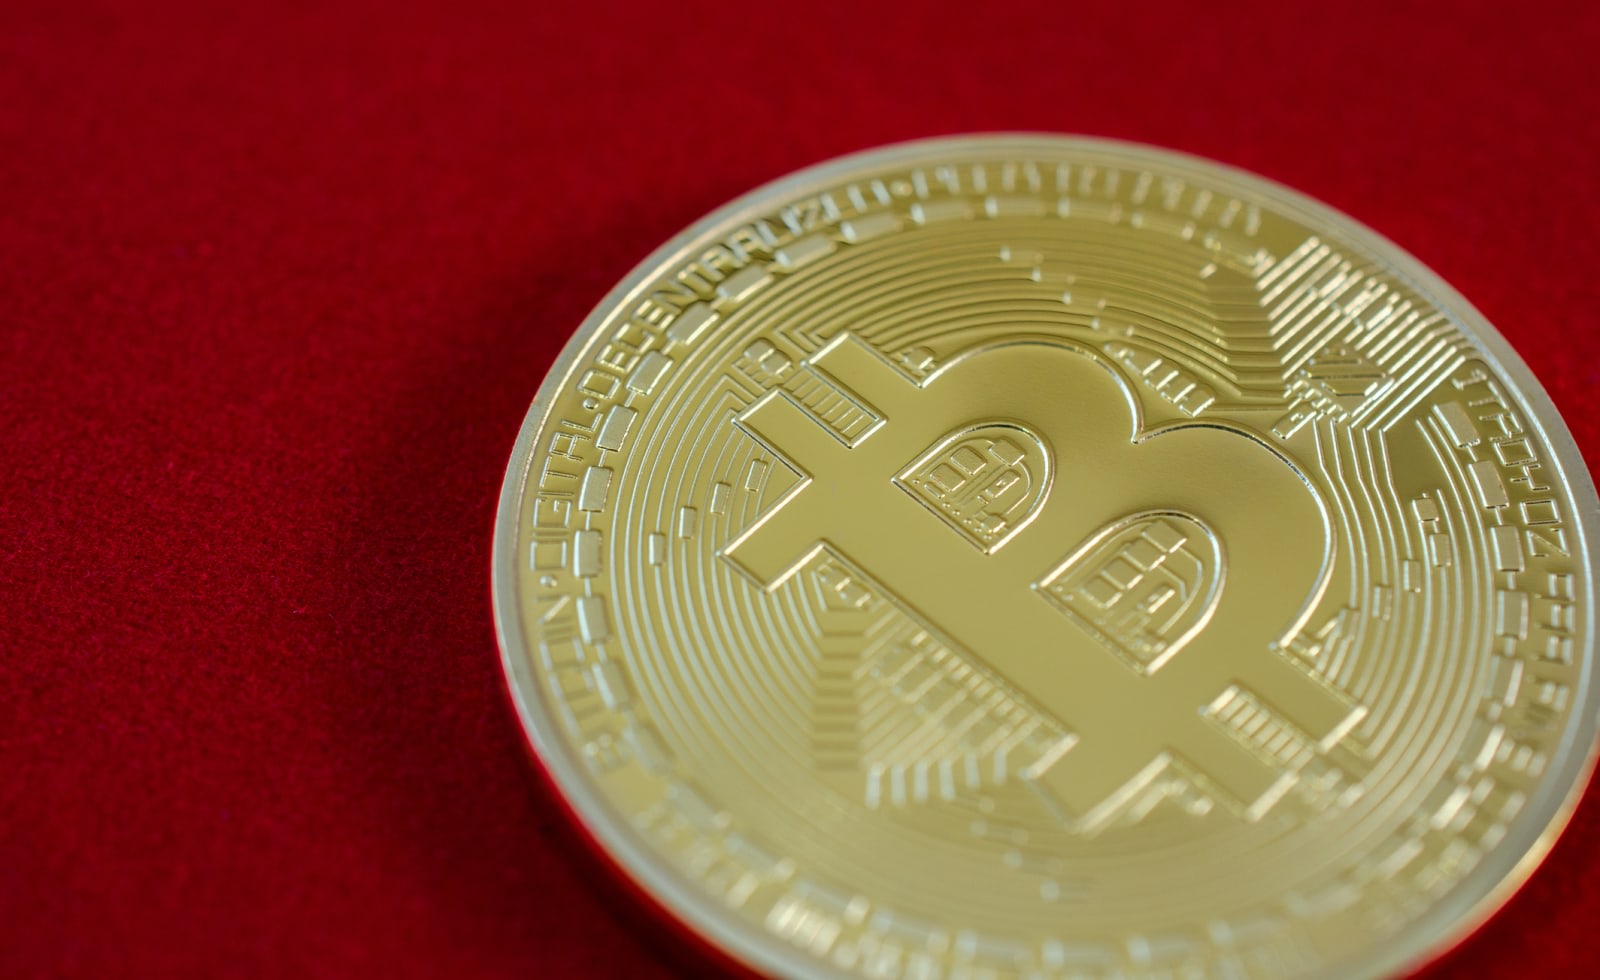 Experts think bitcoin's tech is the future of finance